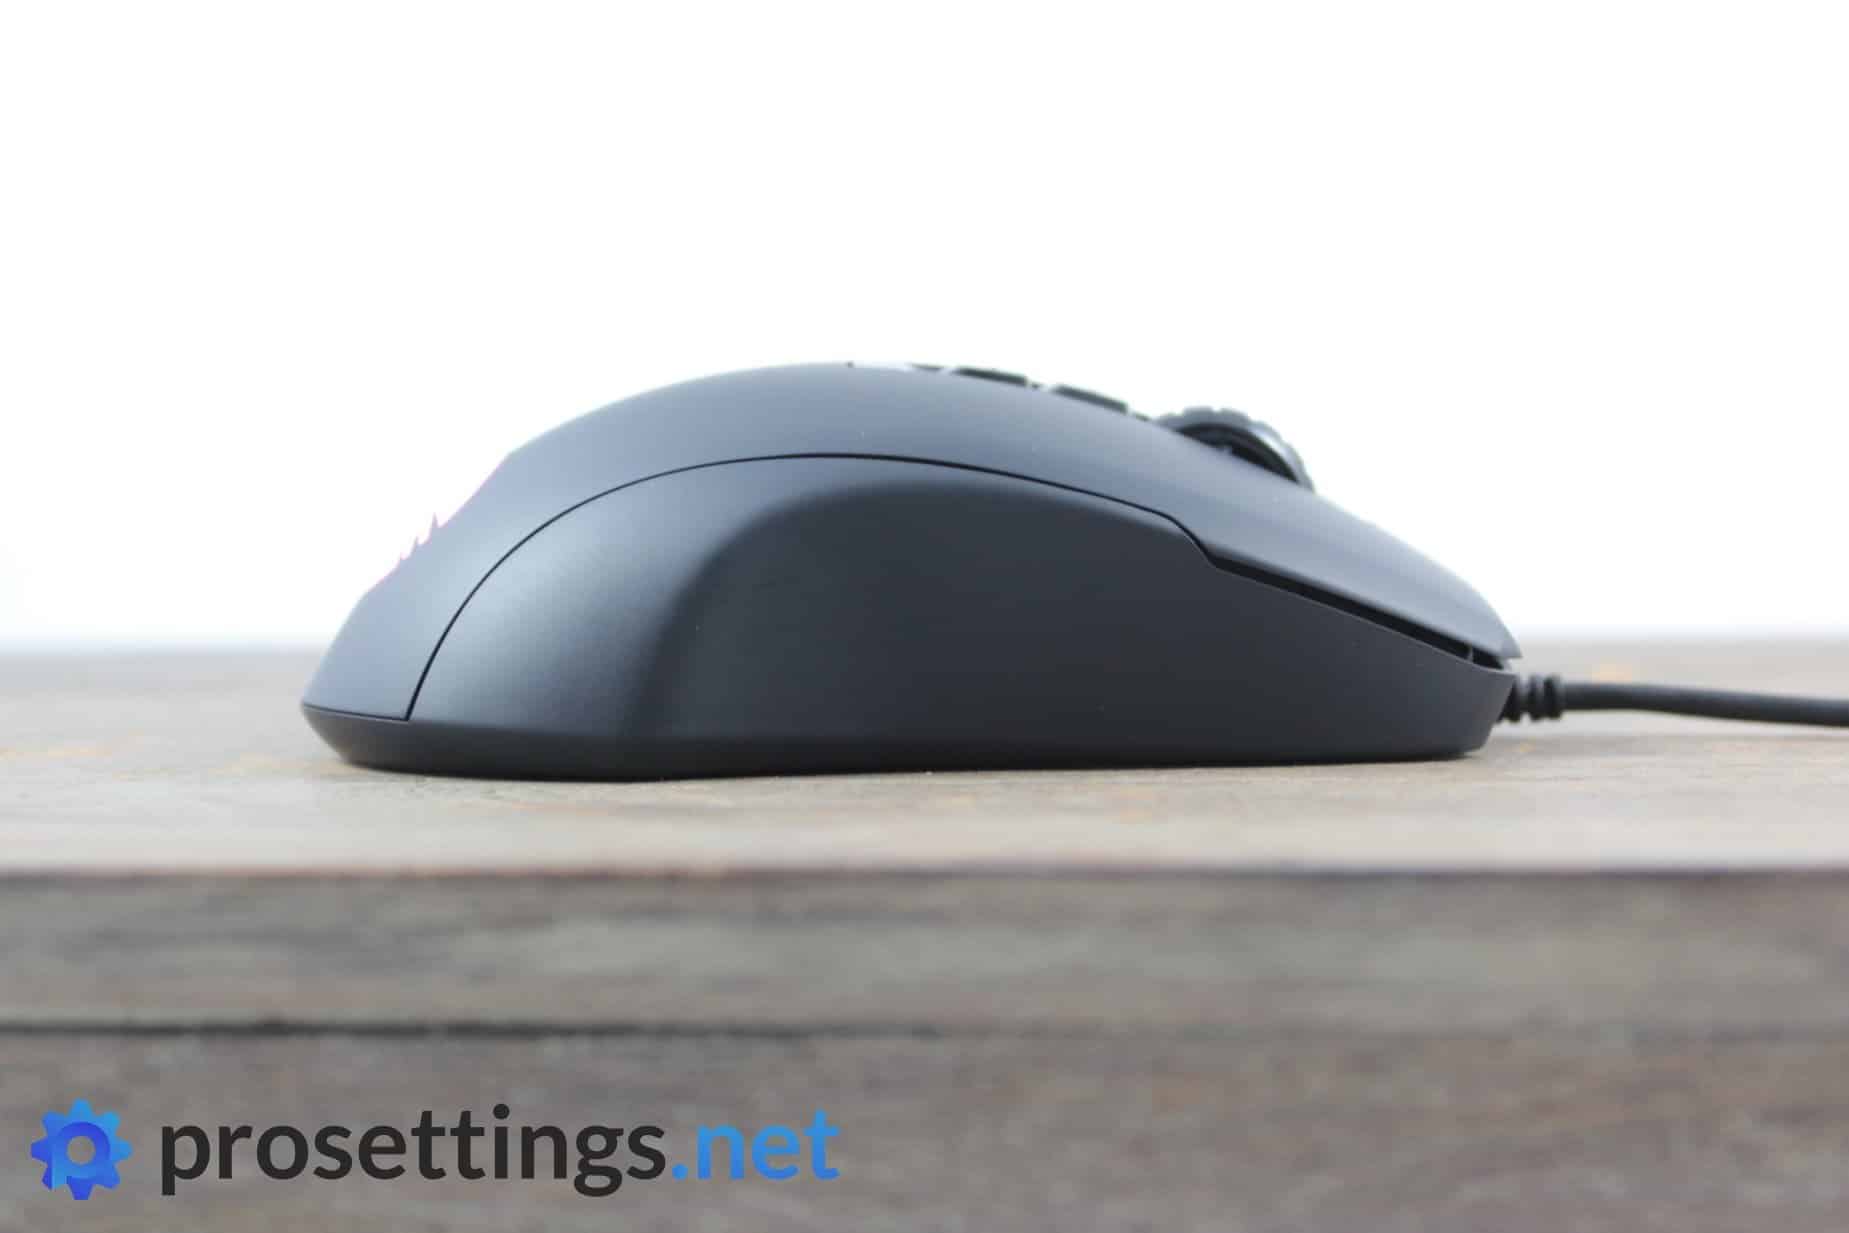 Roccat Kone Pure Ultra Mouse Review